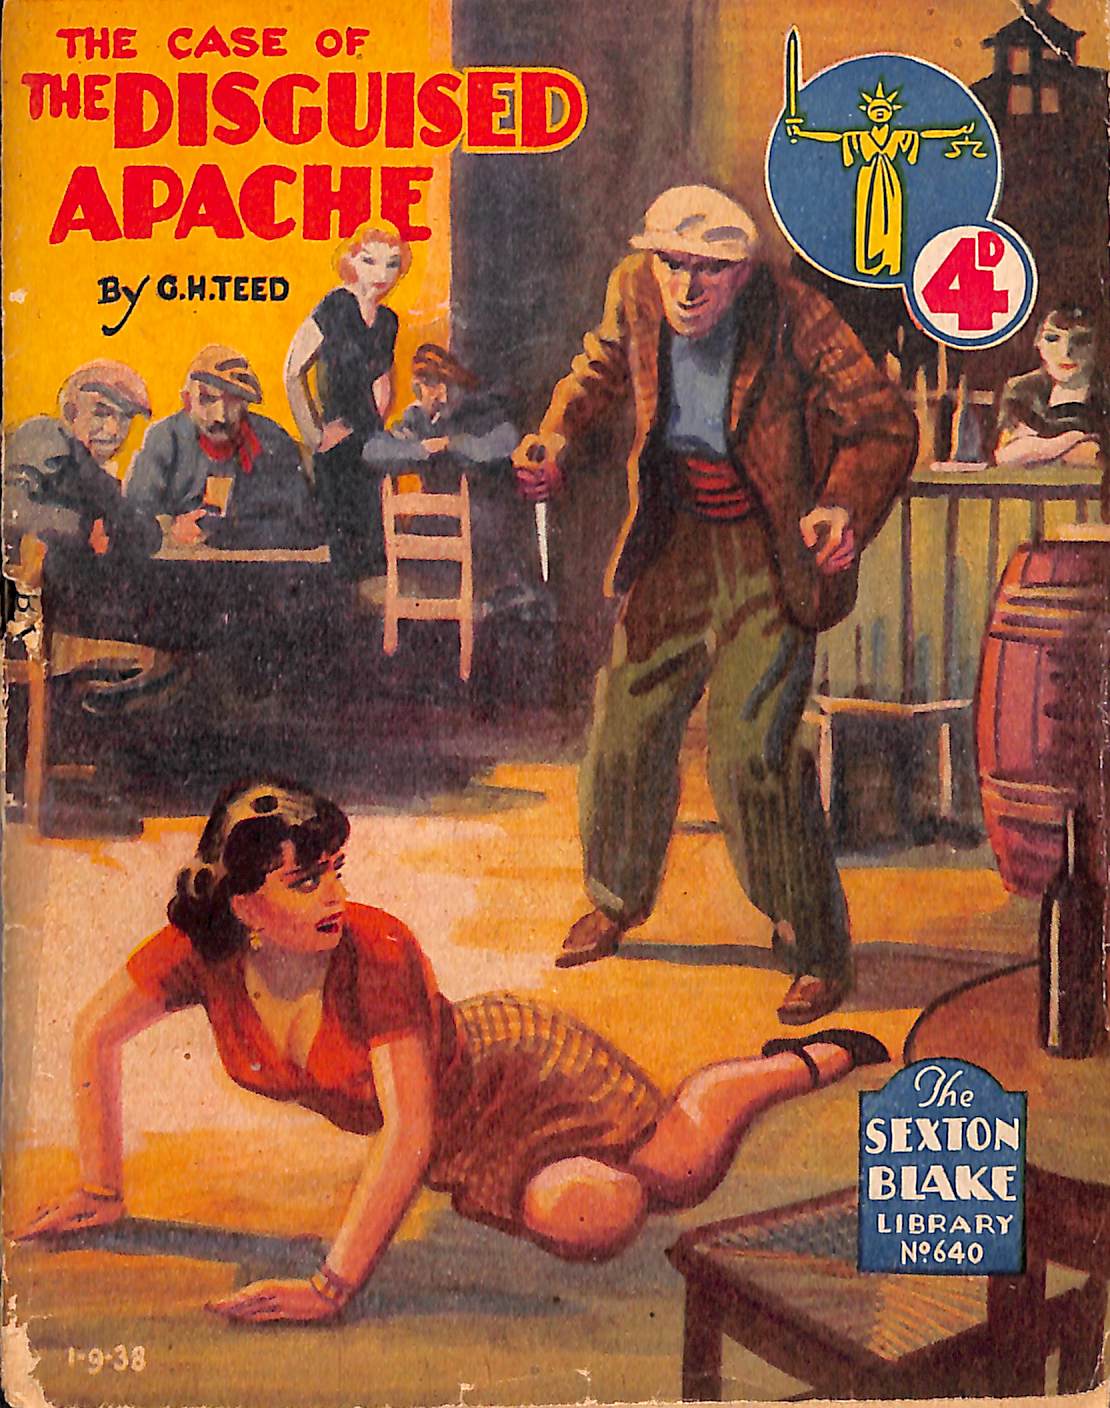 Comic Book Cover For Sexton Blake Library S2 640 - The Case of the Disguised Apache